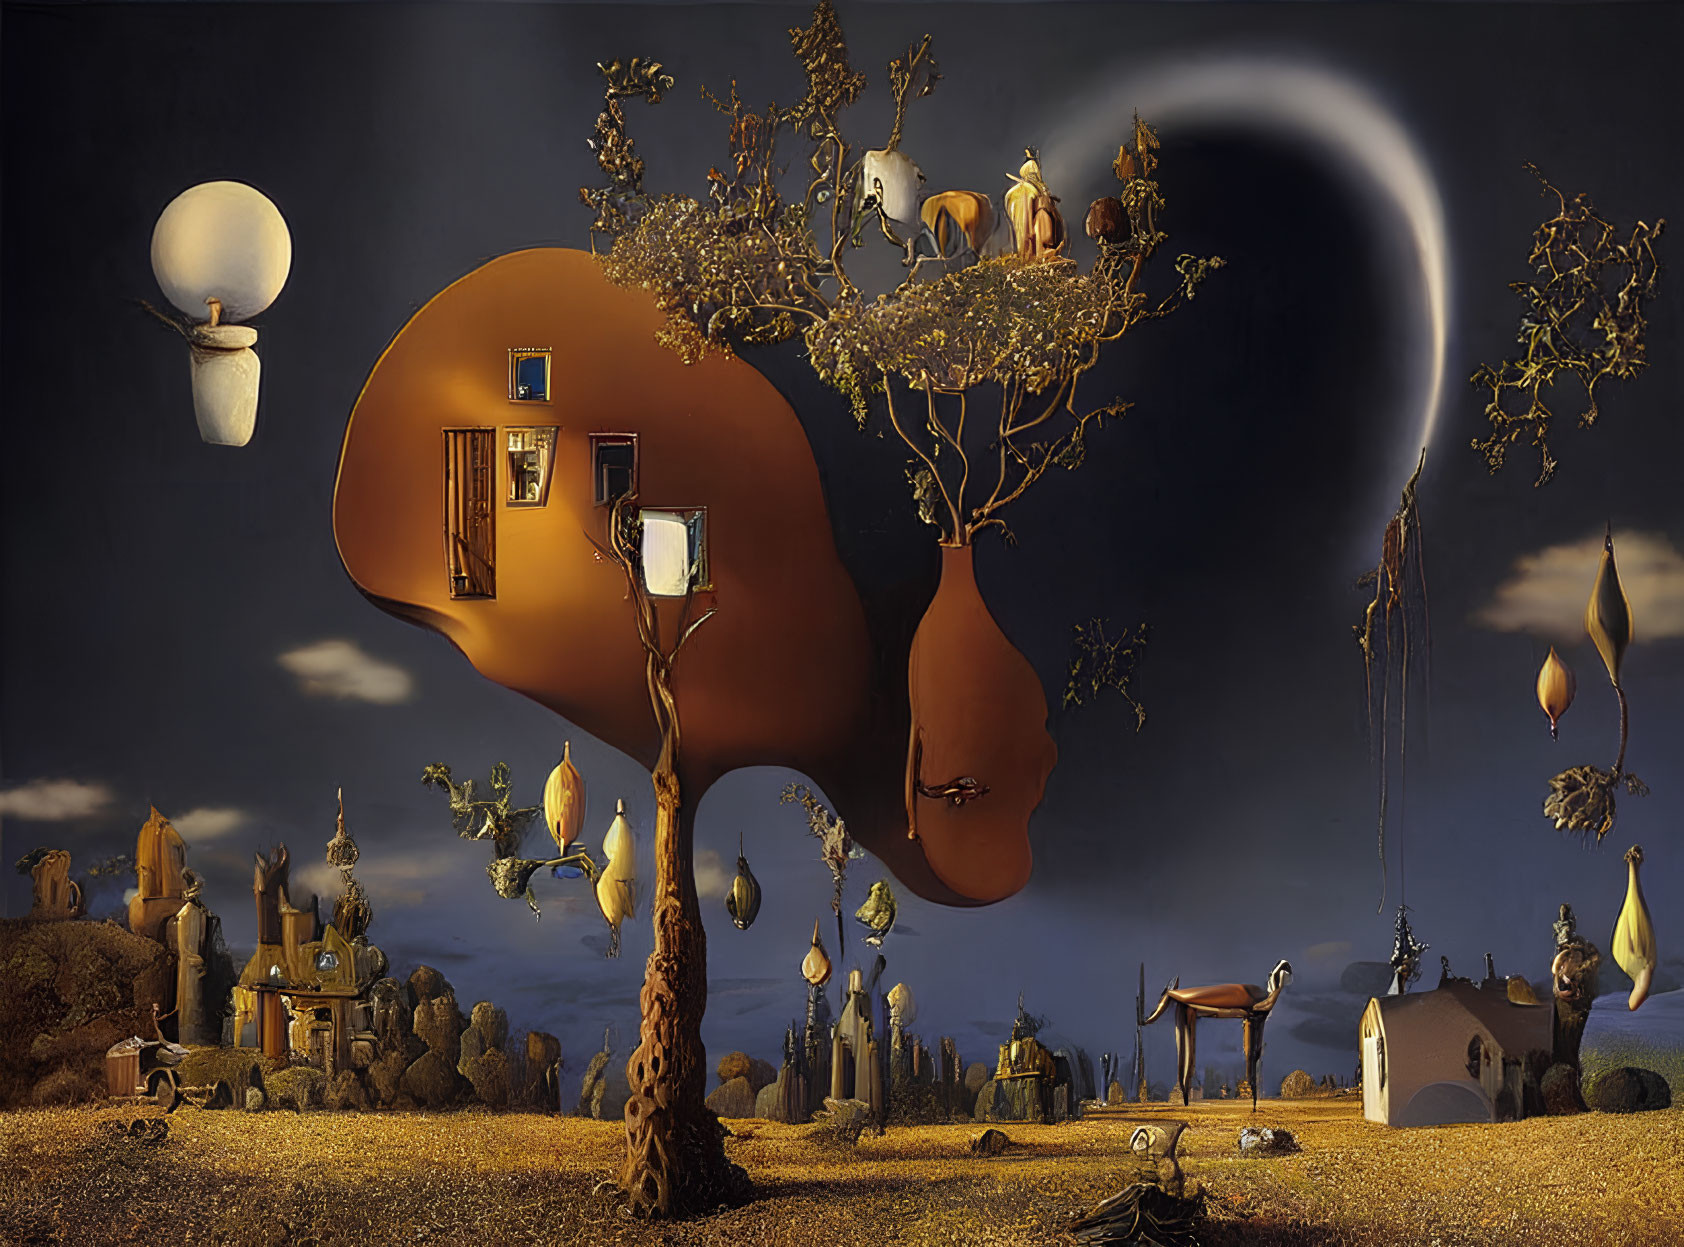 Surreal painting featuring whimsical tree, lanterns, moon, structures, and horse